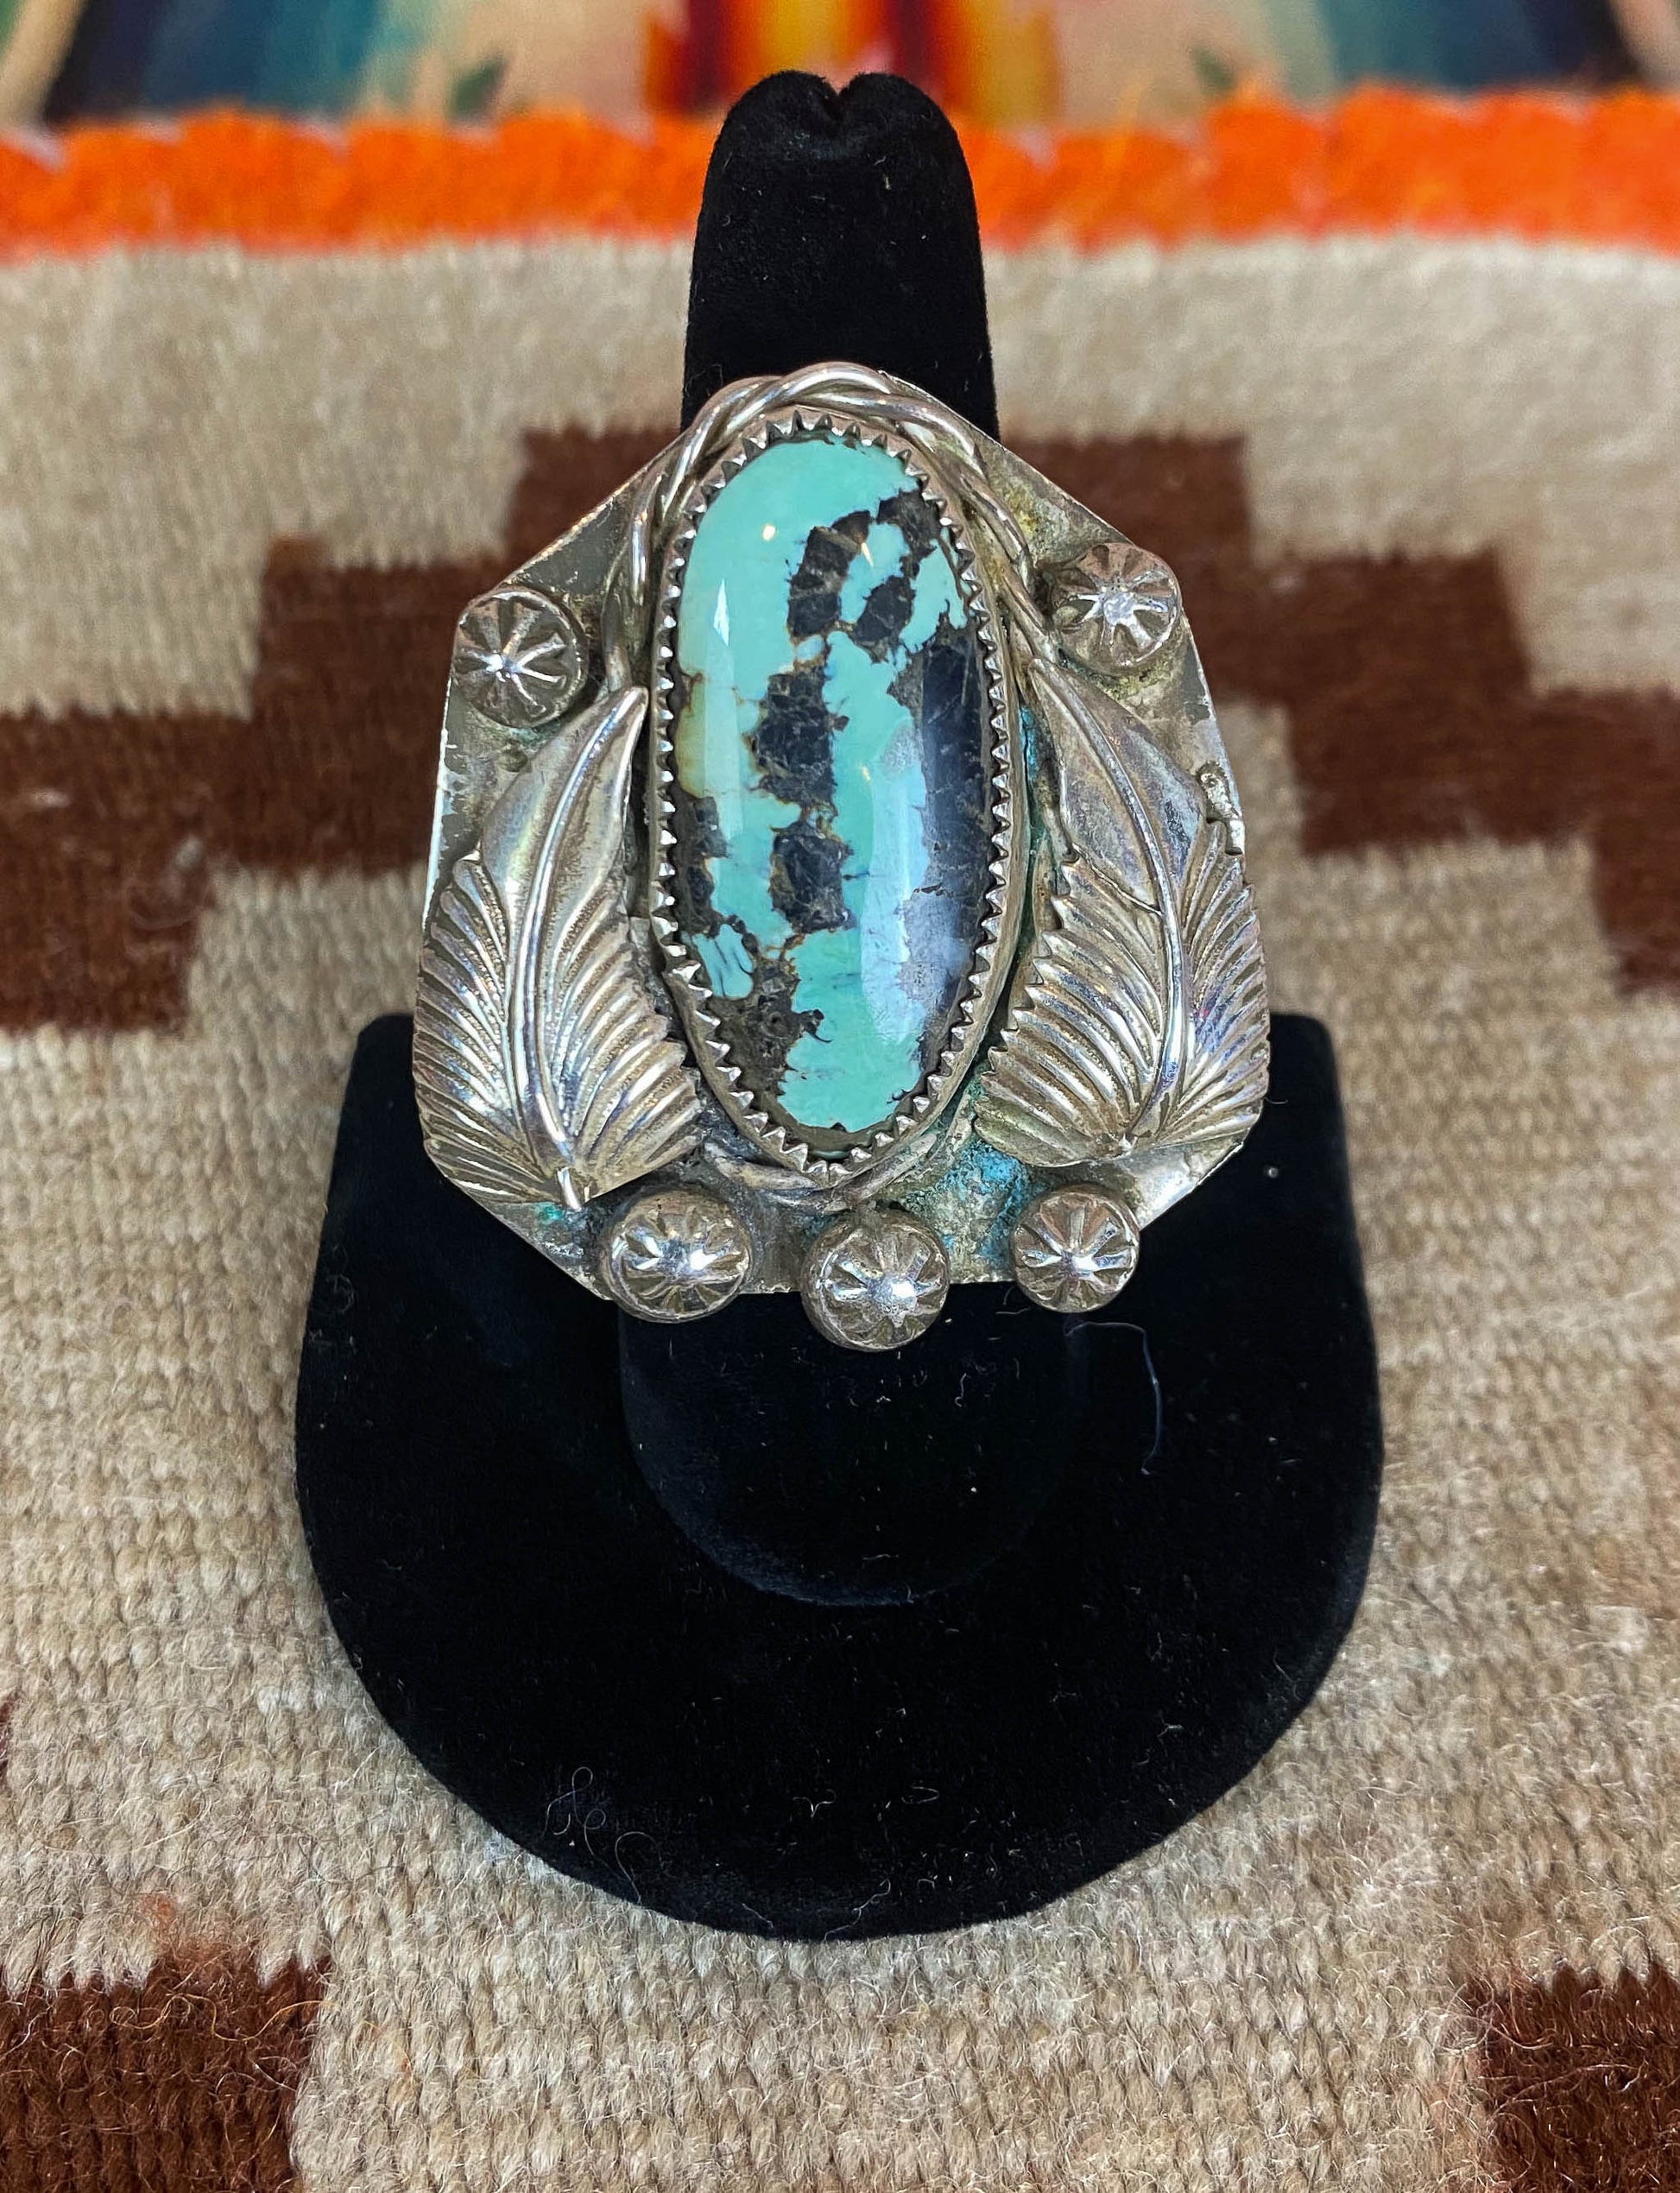 Vintage 70's Seafoam Green Turquoise Ring Sterling Silver Engraved Feather Decorative Band Size 8.5